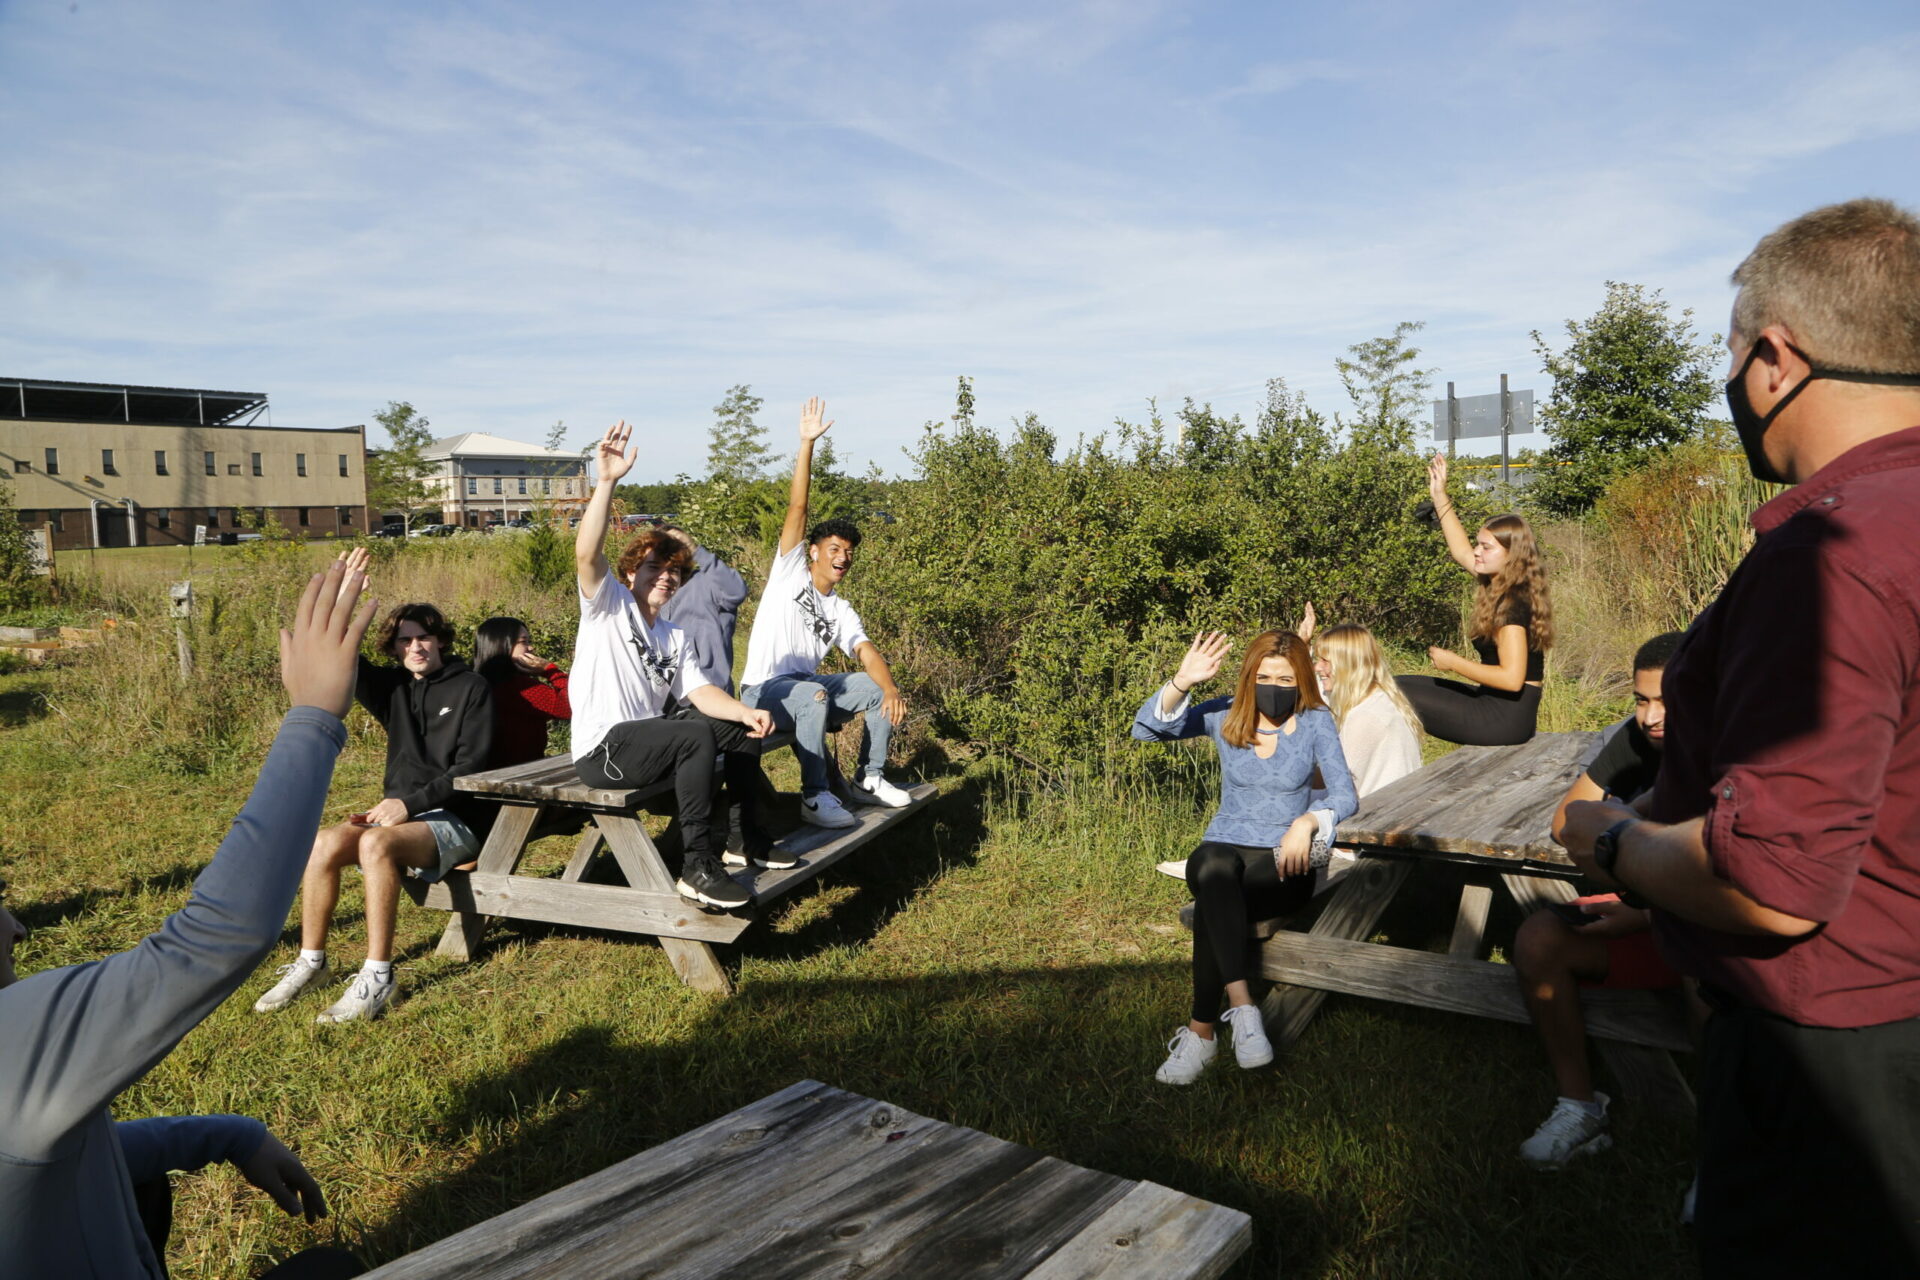 An outdoor classroom inspires students, staff at Egg Harbor Township High School - New Jersey Education Association